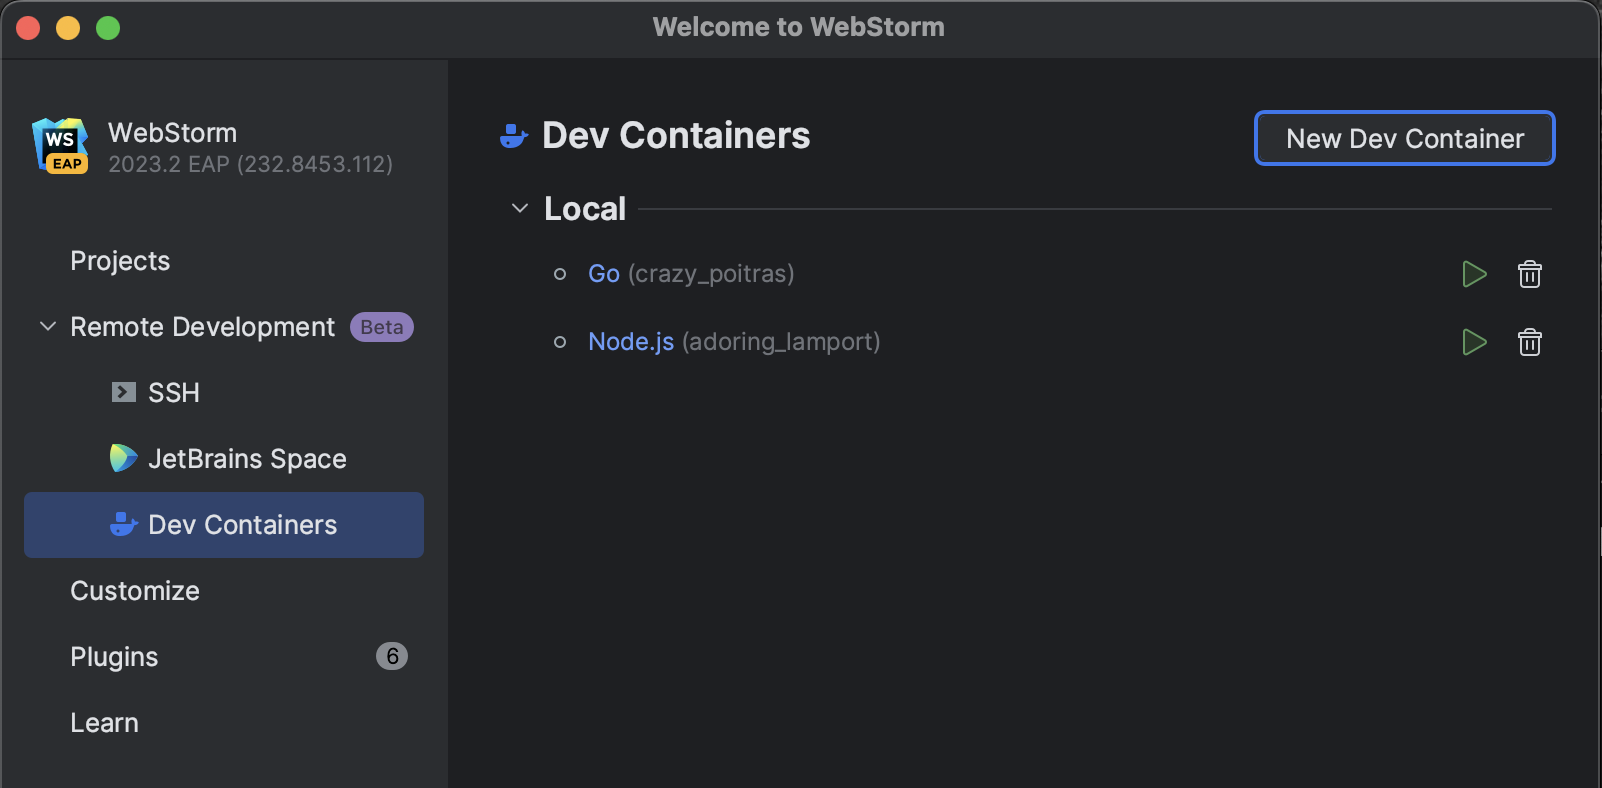 Showing teh Dev container option available in the Welcome screen of WebStorm